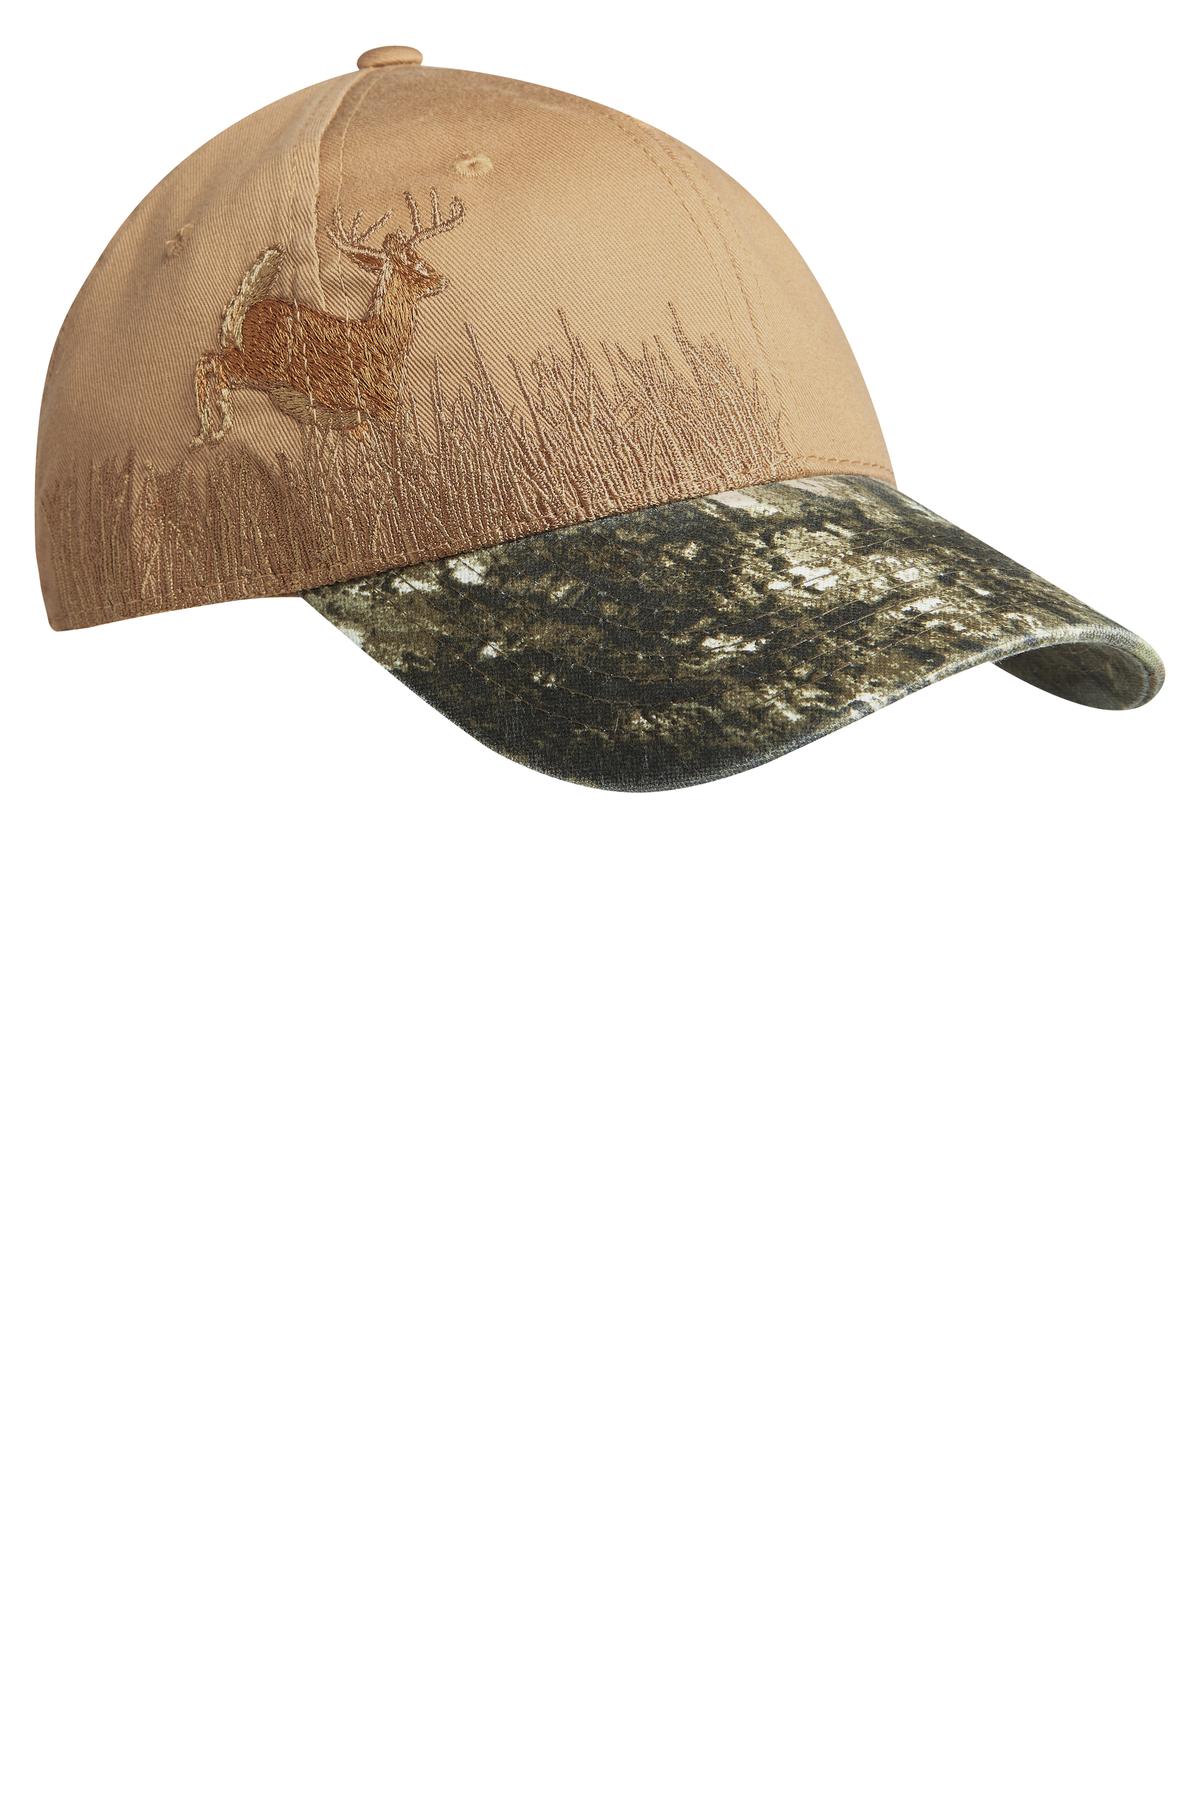 Port Authority Hospitality Caps ® Embroidered Camouflage Cap.-Port Authority